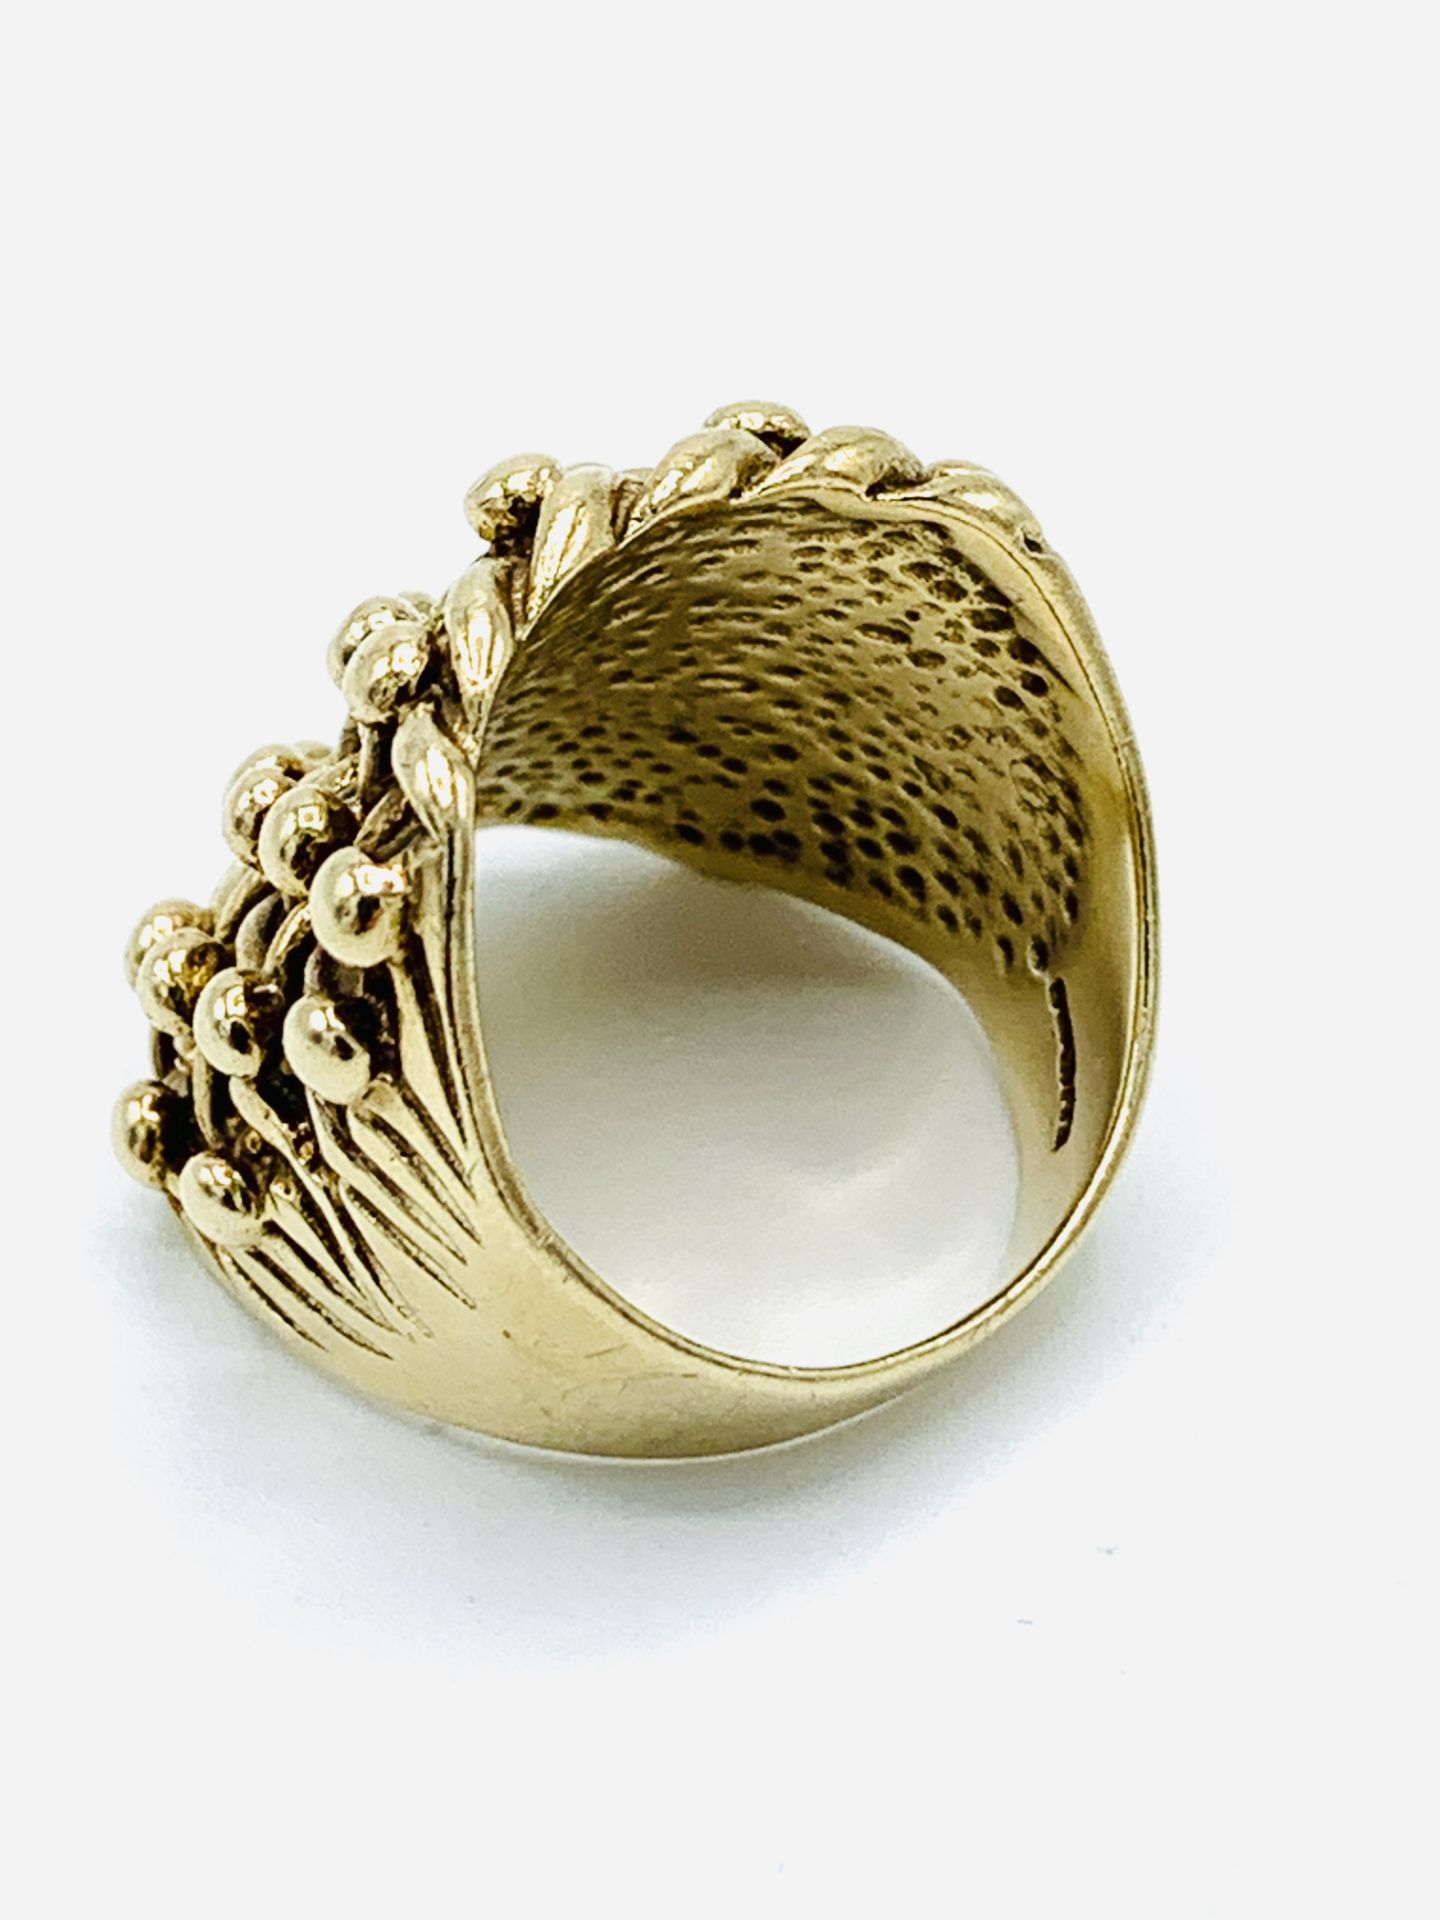 9ct gold 'gypsy' ring. - Image 2 of 3